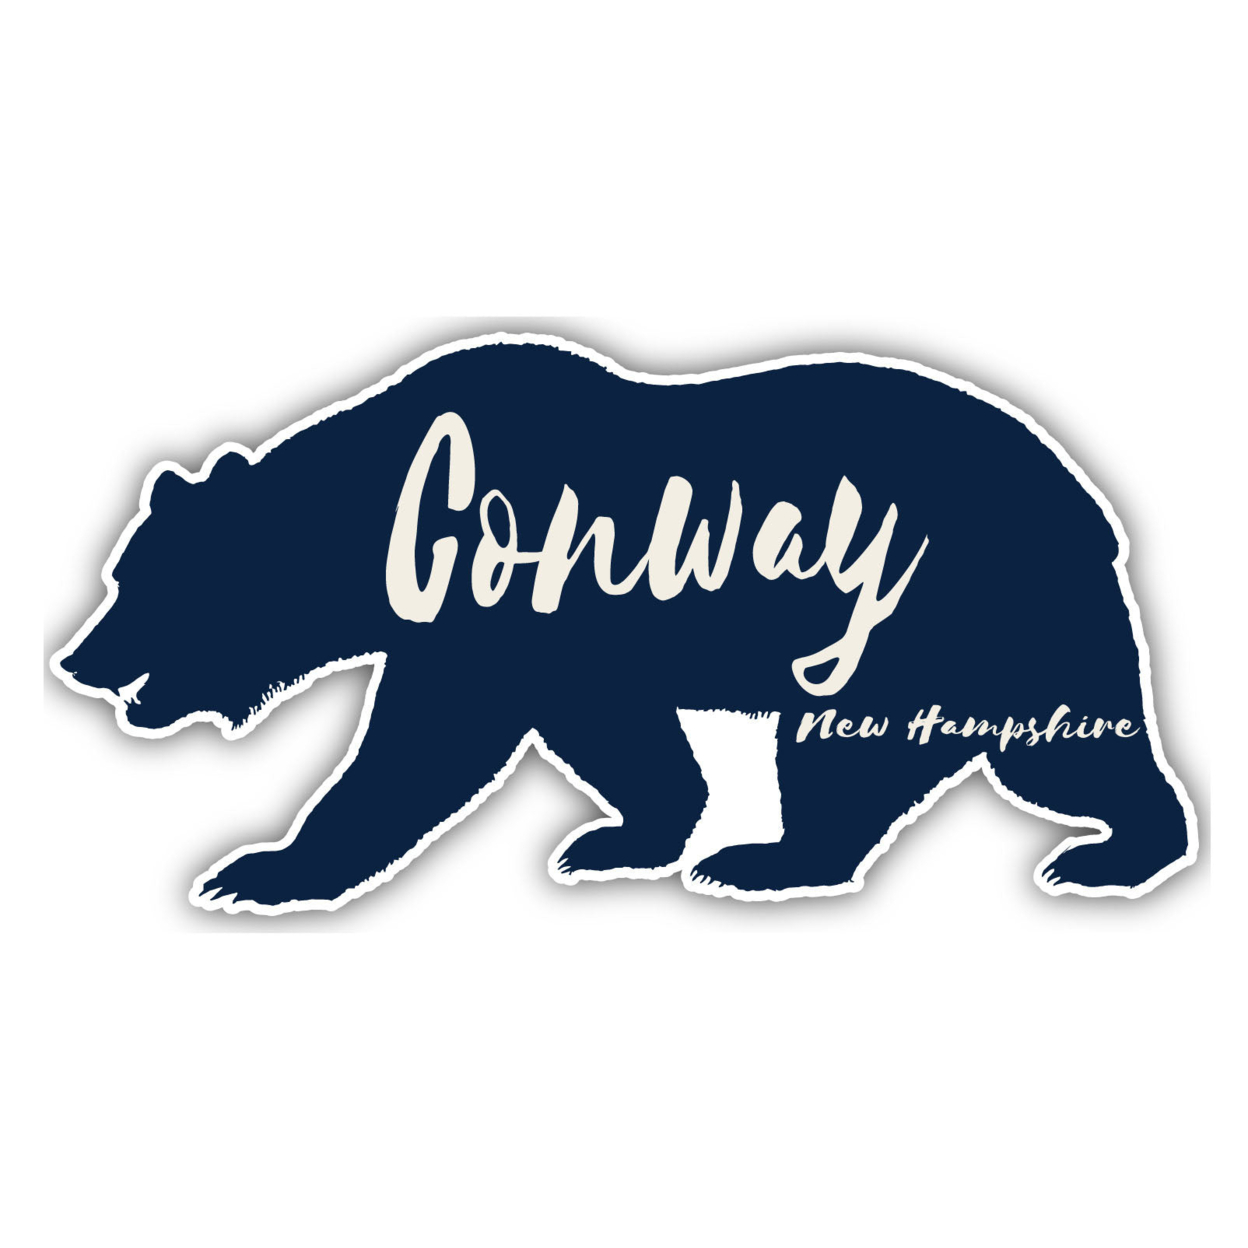 Conway New Hampshire Souvenir Decorative Stickers (Choose Theme And Size) - Single Unit, 4-Inch, Bear